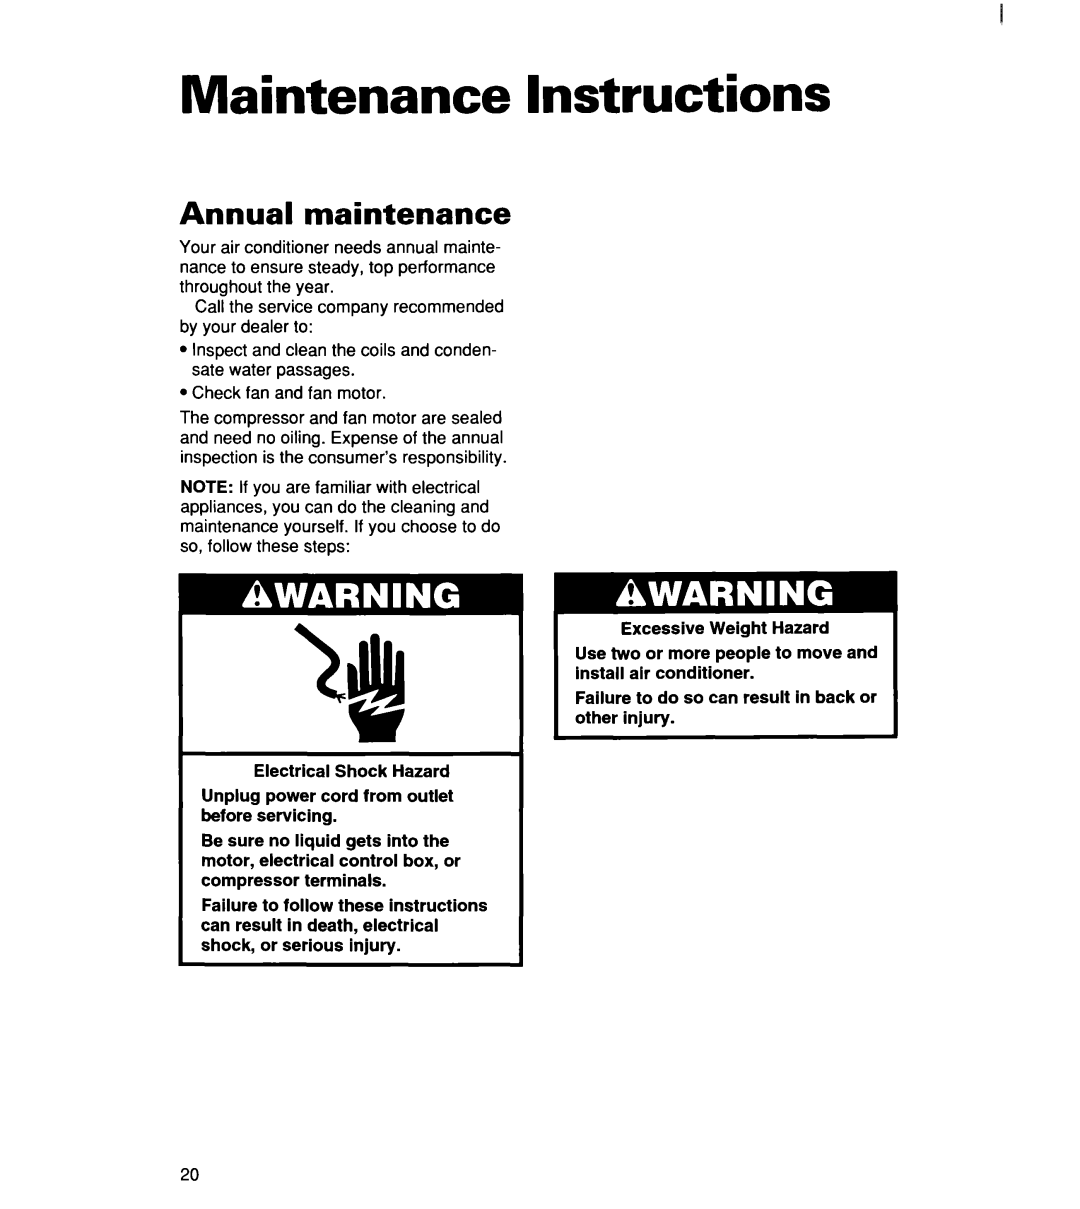 Whirlpool ACM184XE0, ACM 152XE0, ACM244XE0 important safety instructions Maintenance Instructions, Annual maintenance 